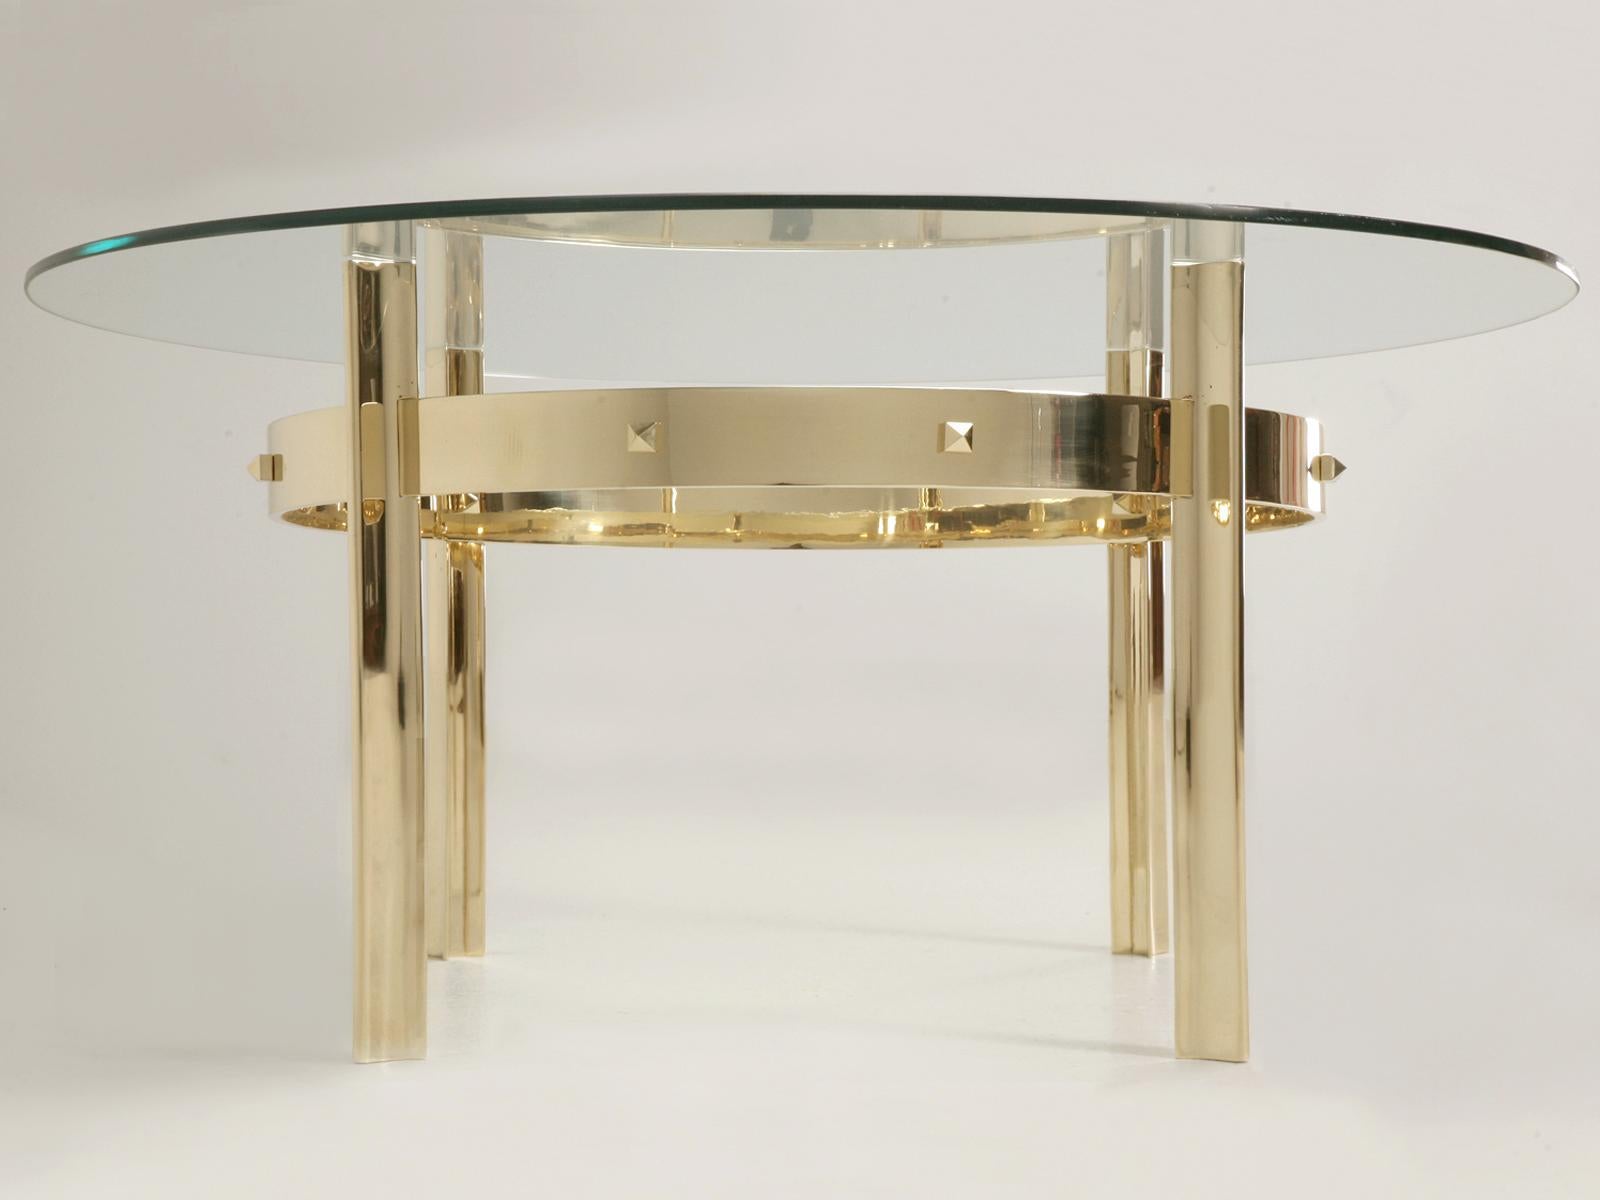 Custom Hand-made of Solid Brass and available as both, a Coffee Table, Dining Room Table or Center Hall height. The four grooved legs are connected with a highly polished band offering not only stability, but adding a bit more style to this already